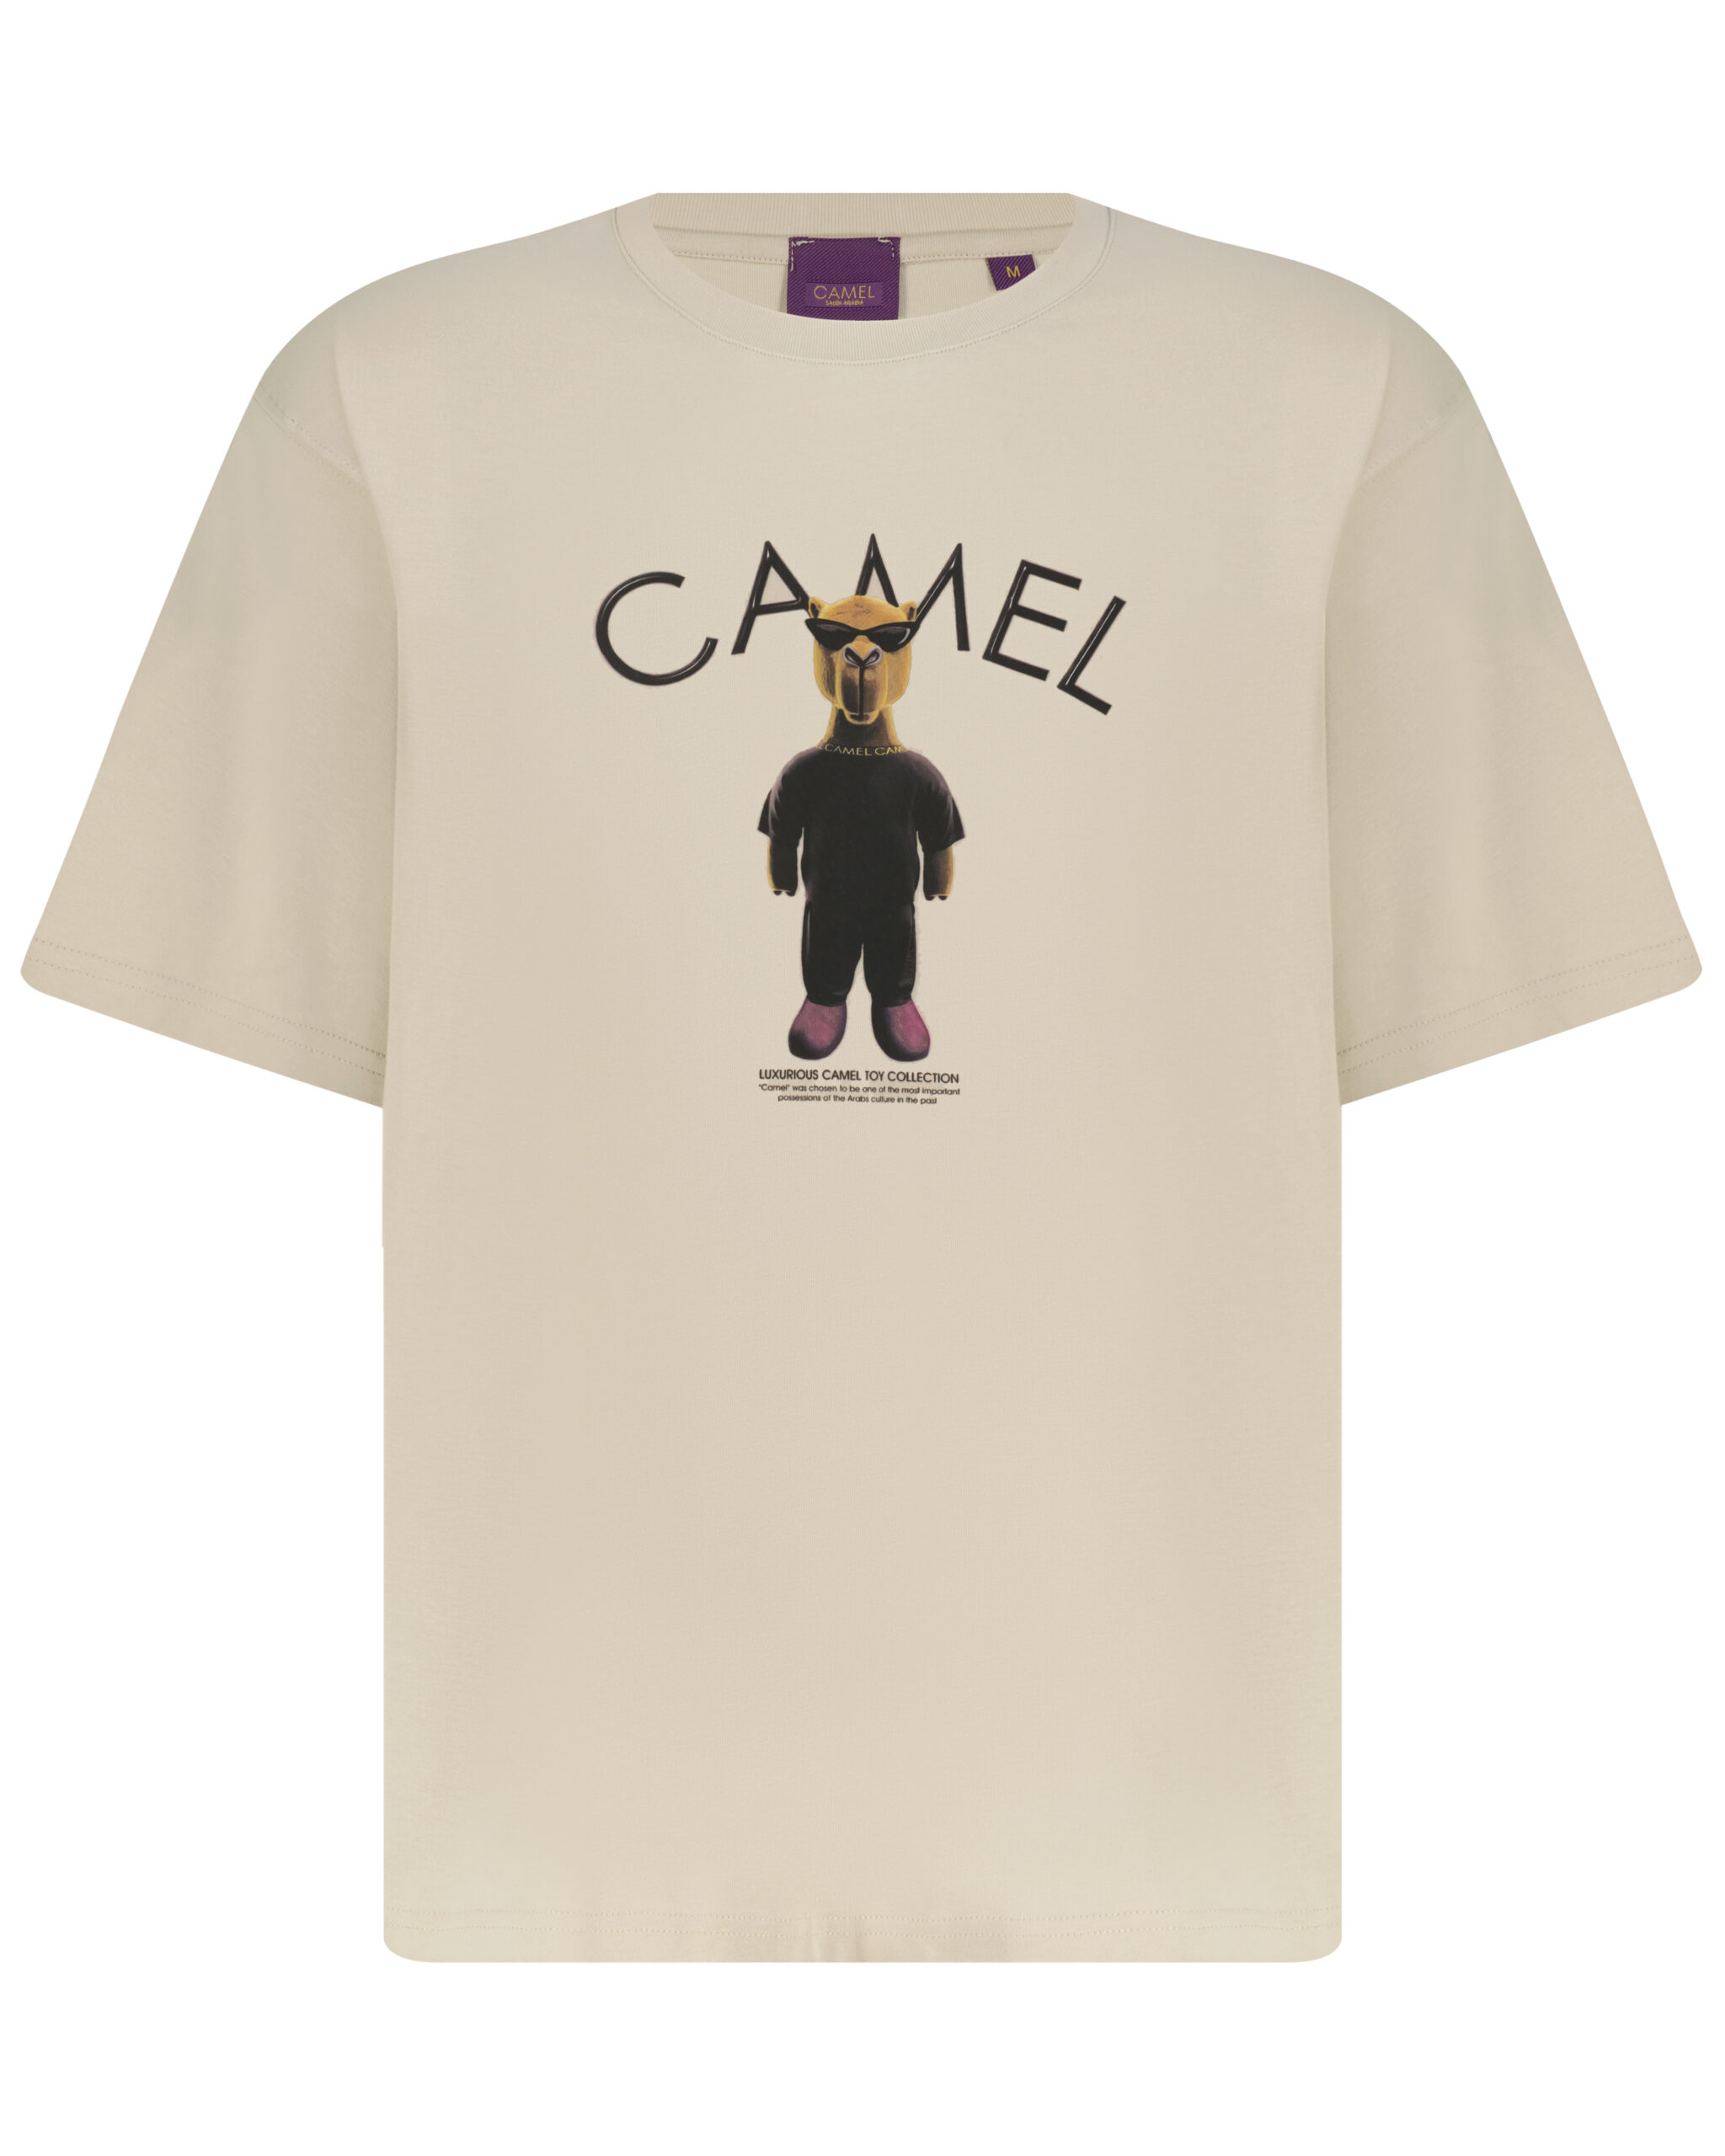 Oversized Brown T-Shirt Made By Camel Brand